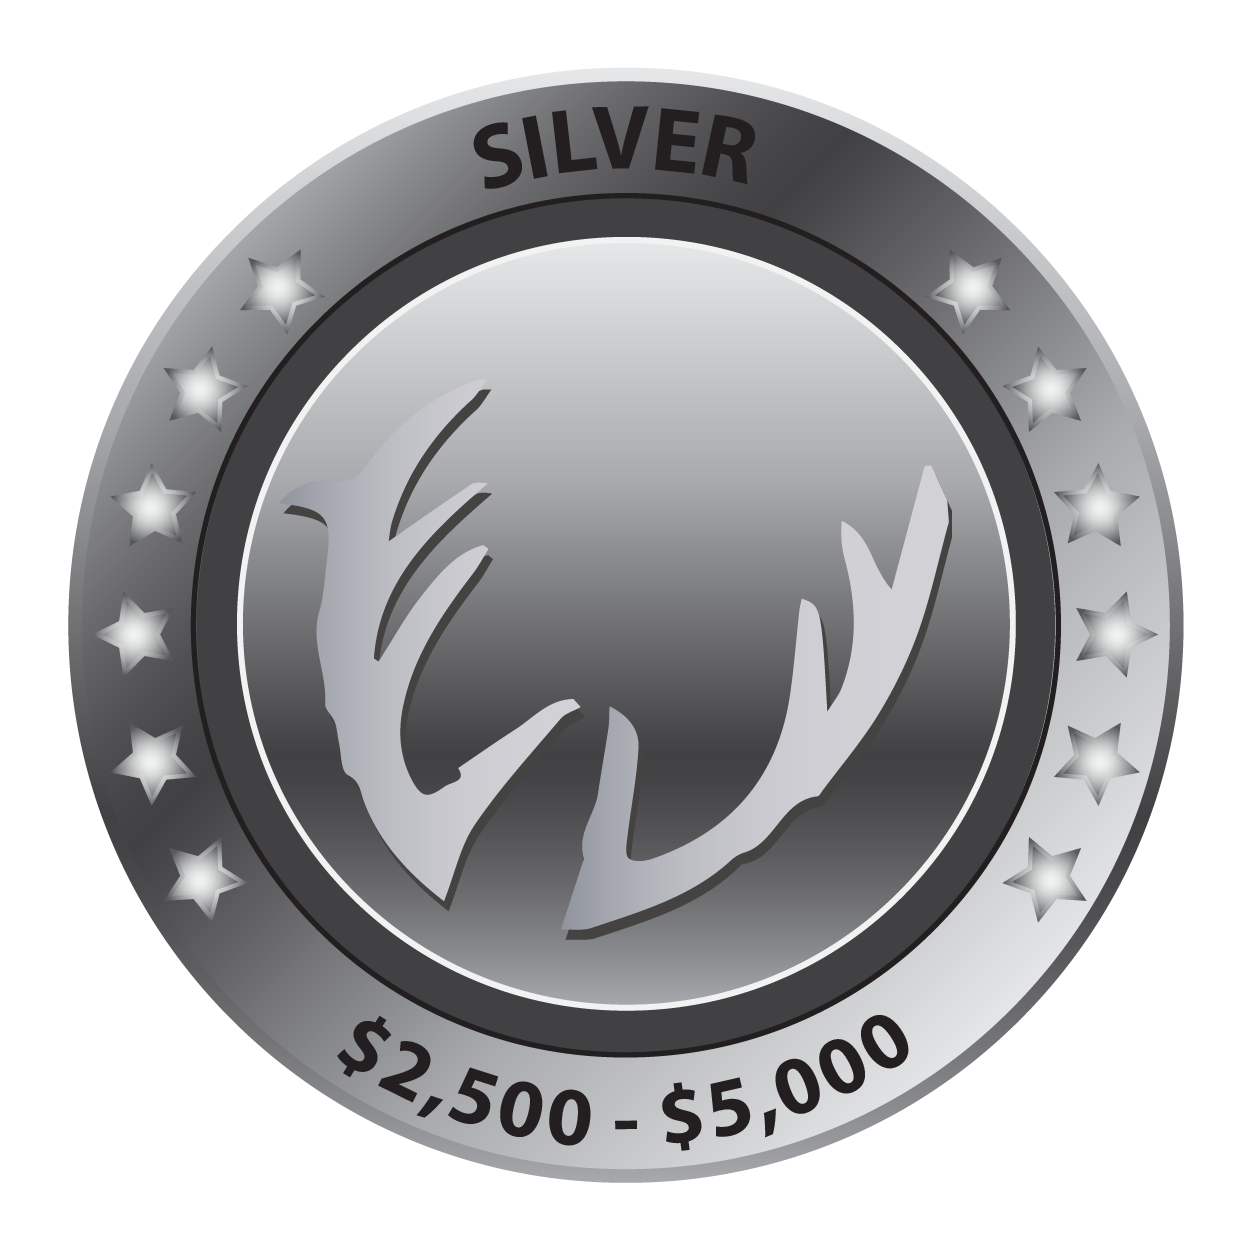 Silver price level $2,500 to $5,000